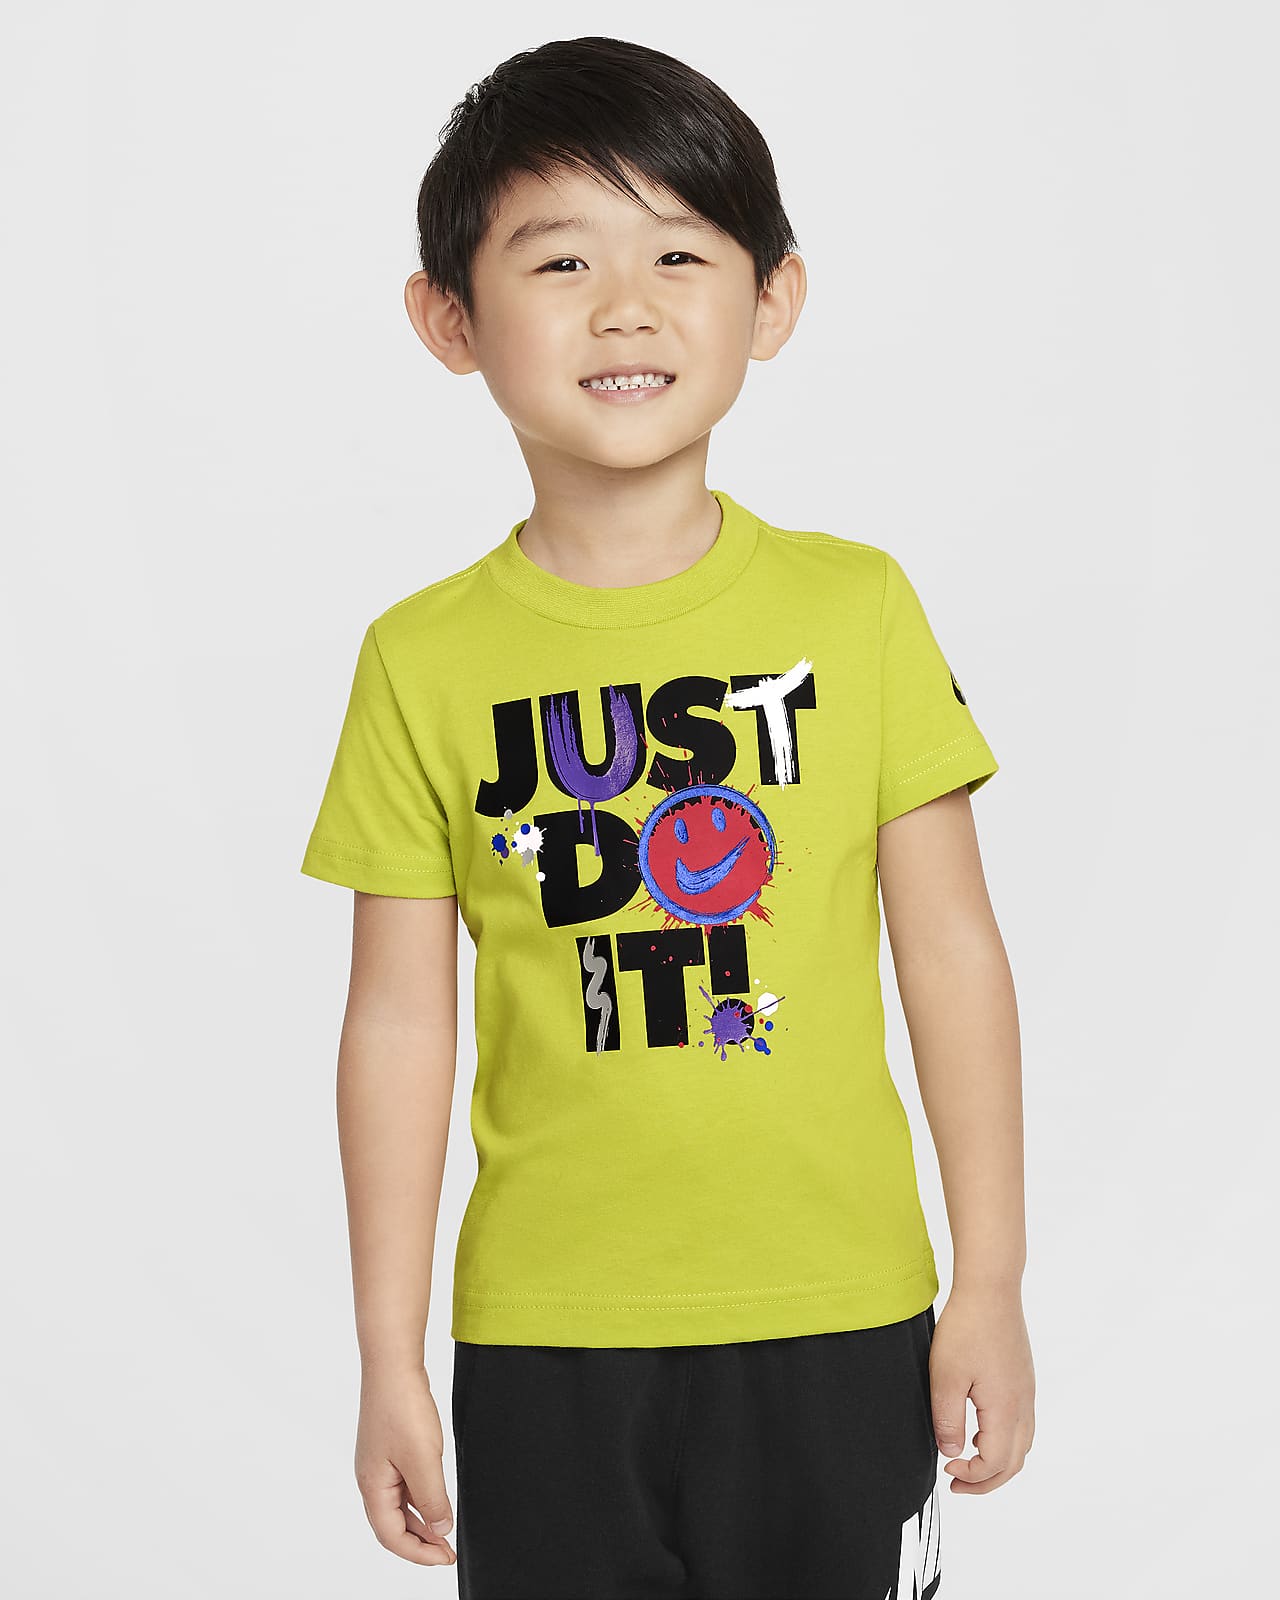 Nike "Express Yourself" Toddler "Just Do It" T-Shirt